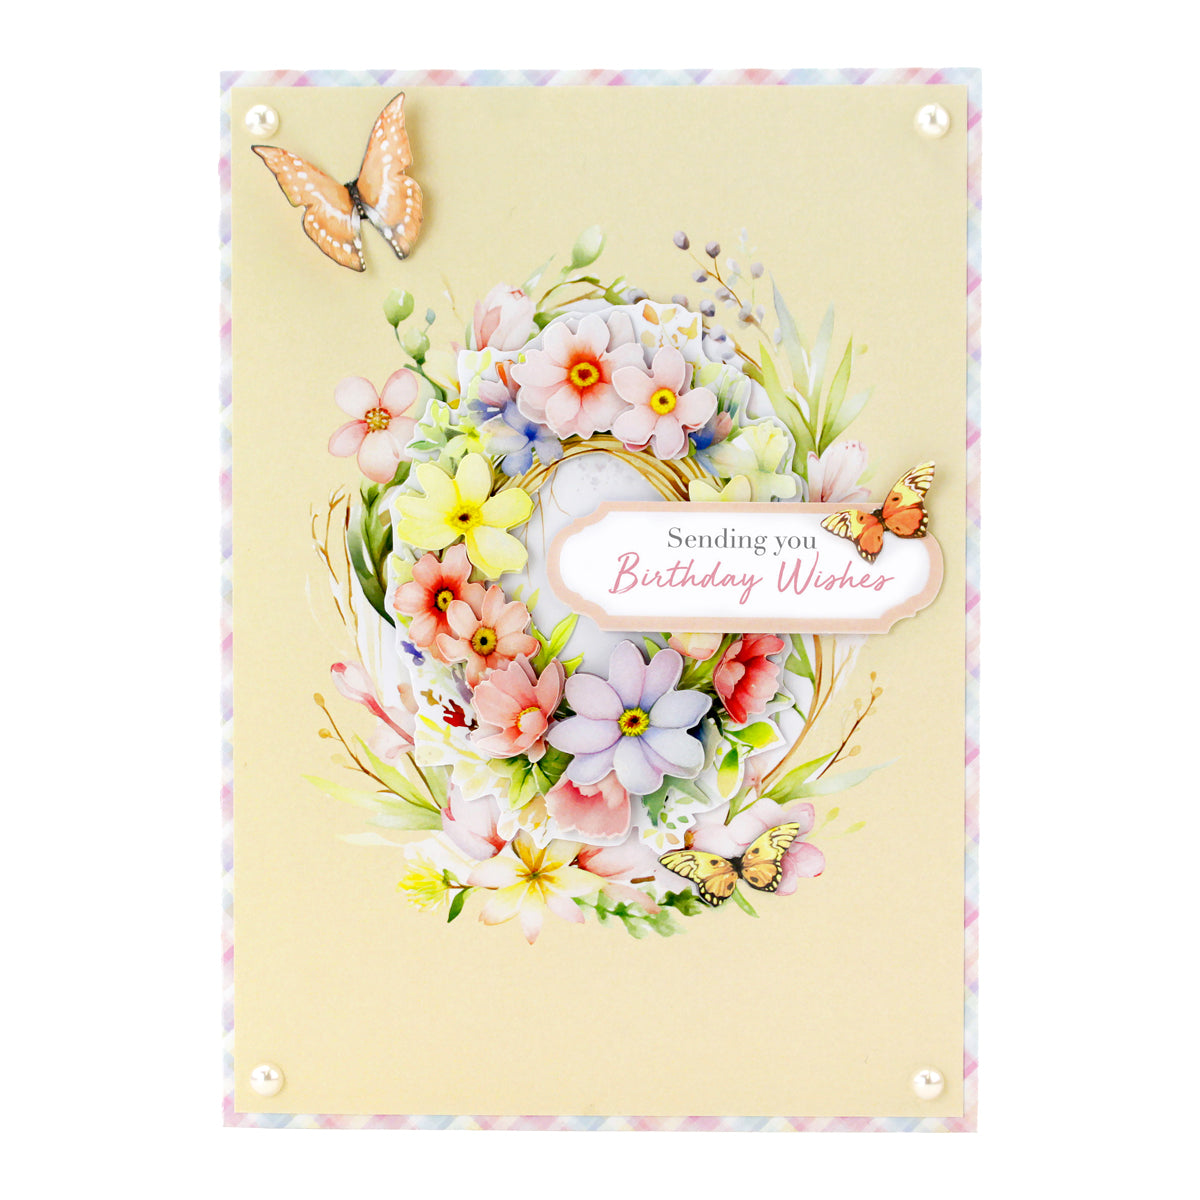 Die Cut Decoupage - Easter Animals & Spring Florals (pack of 12)